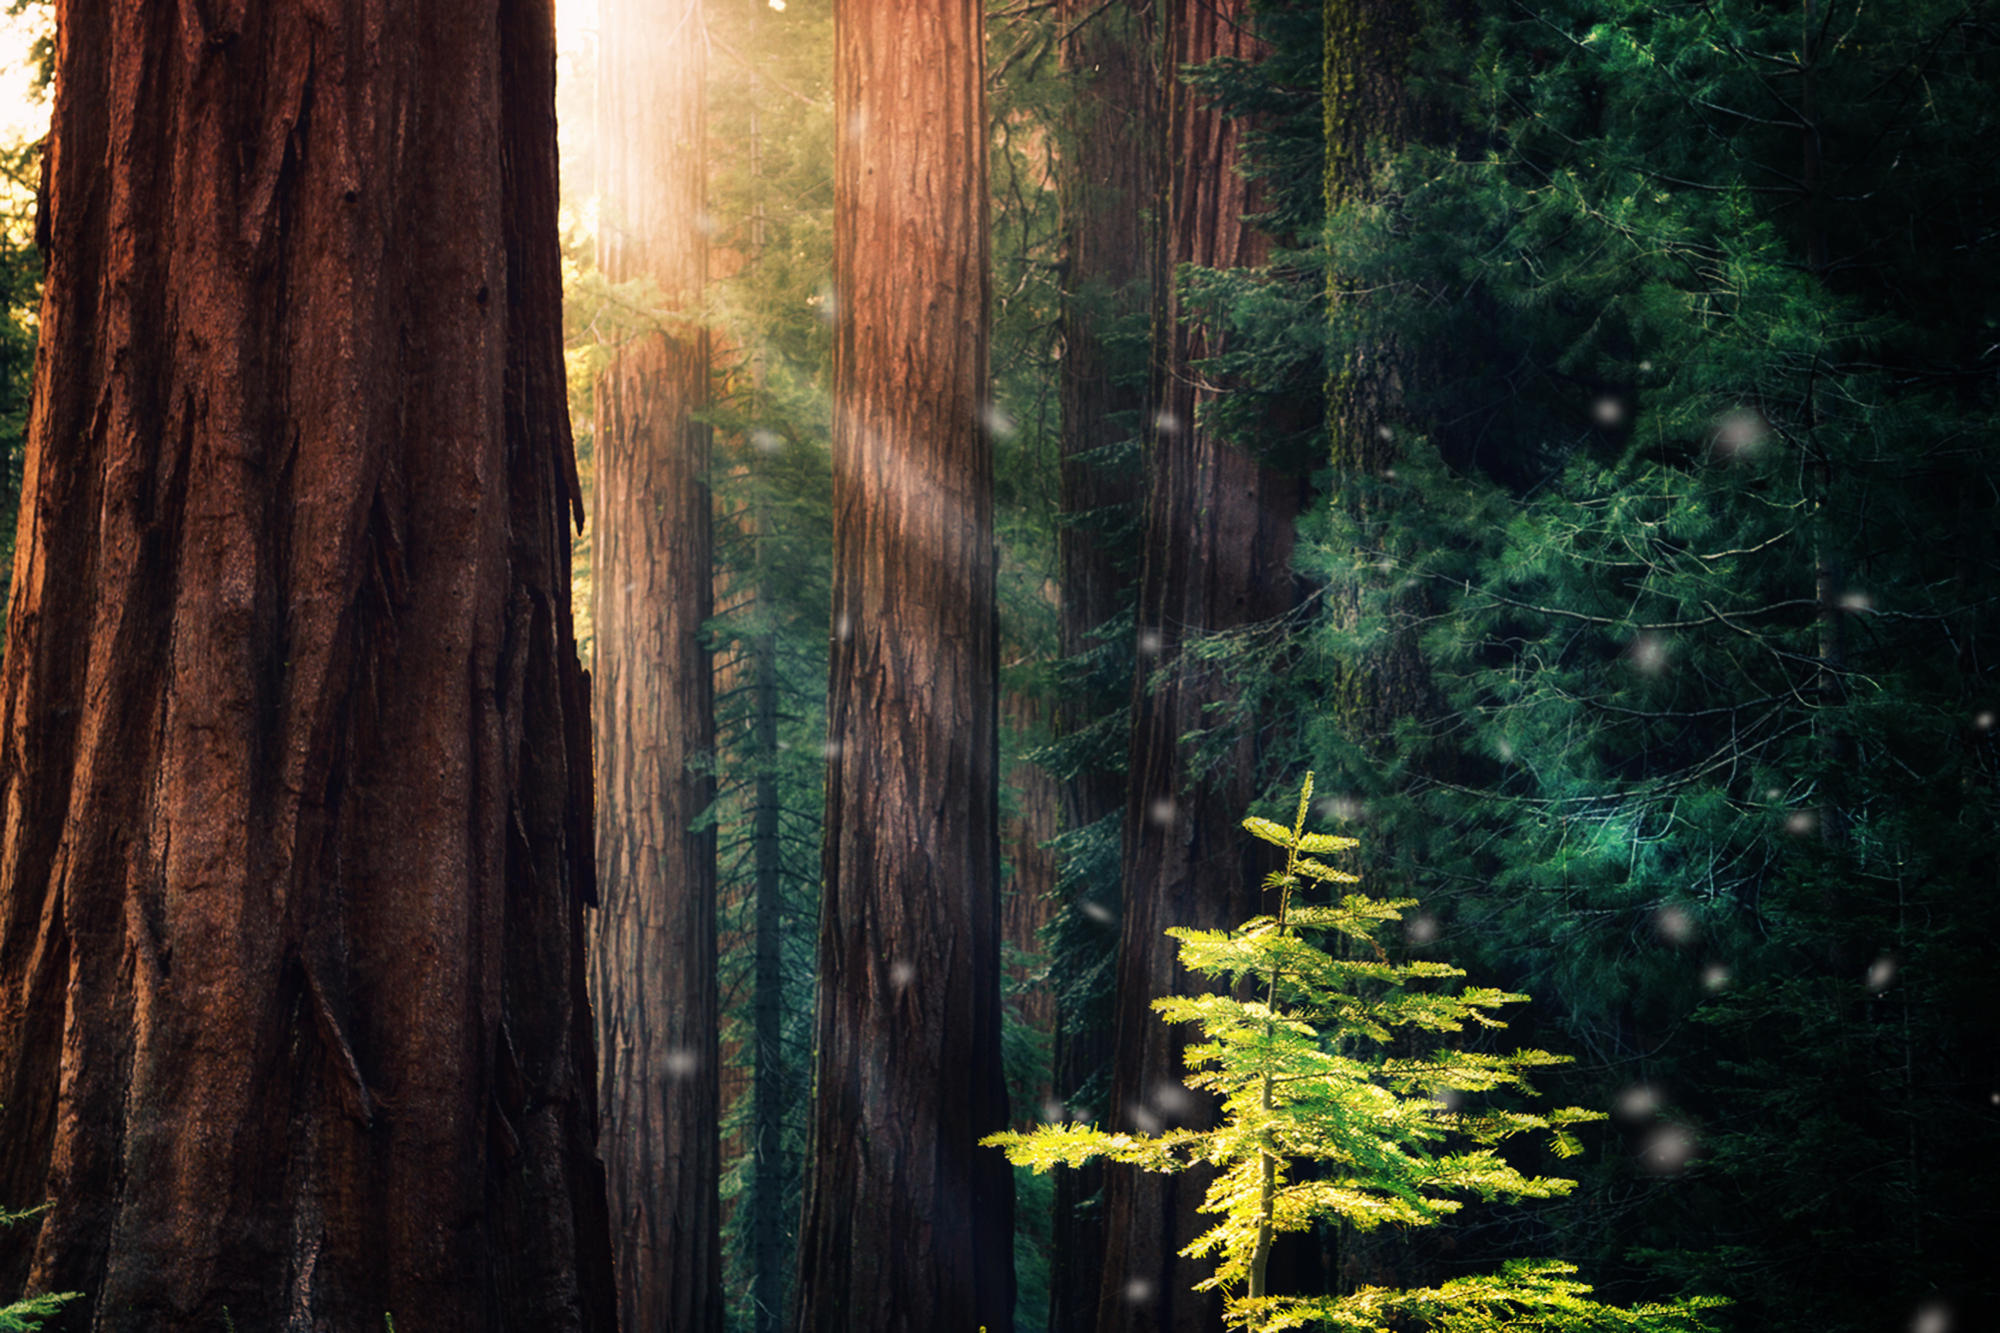 Volume II – “The Secret Life of Trees” – Dreams of the Old Growth Redwoods